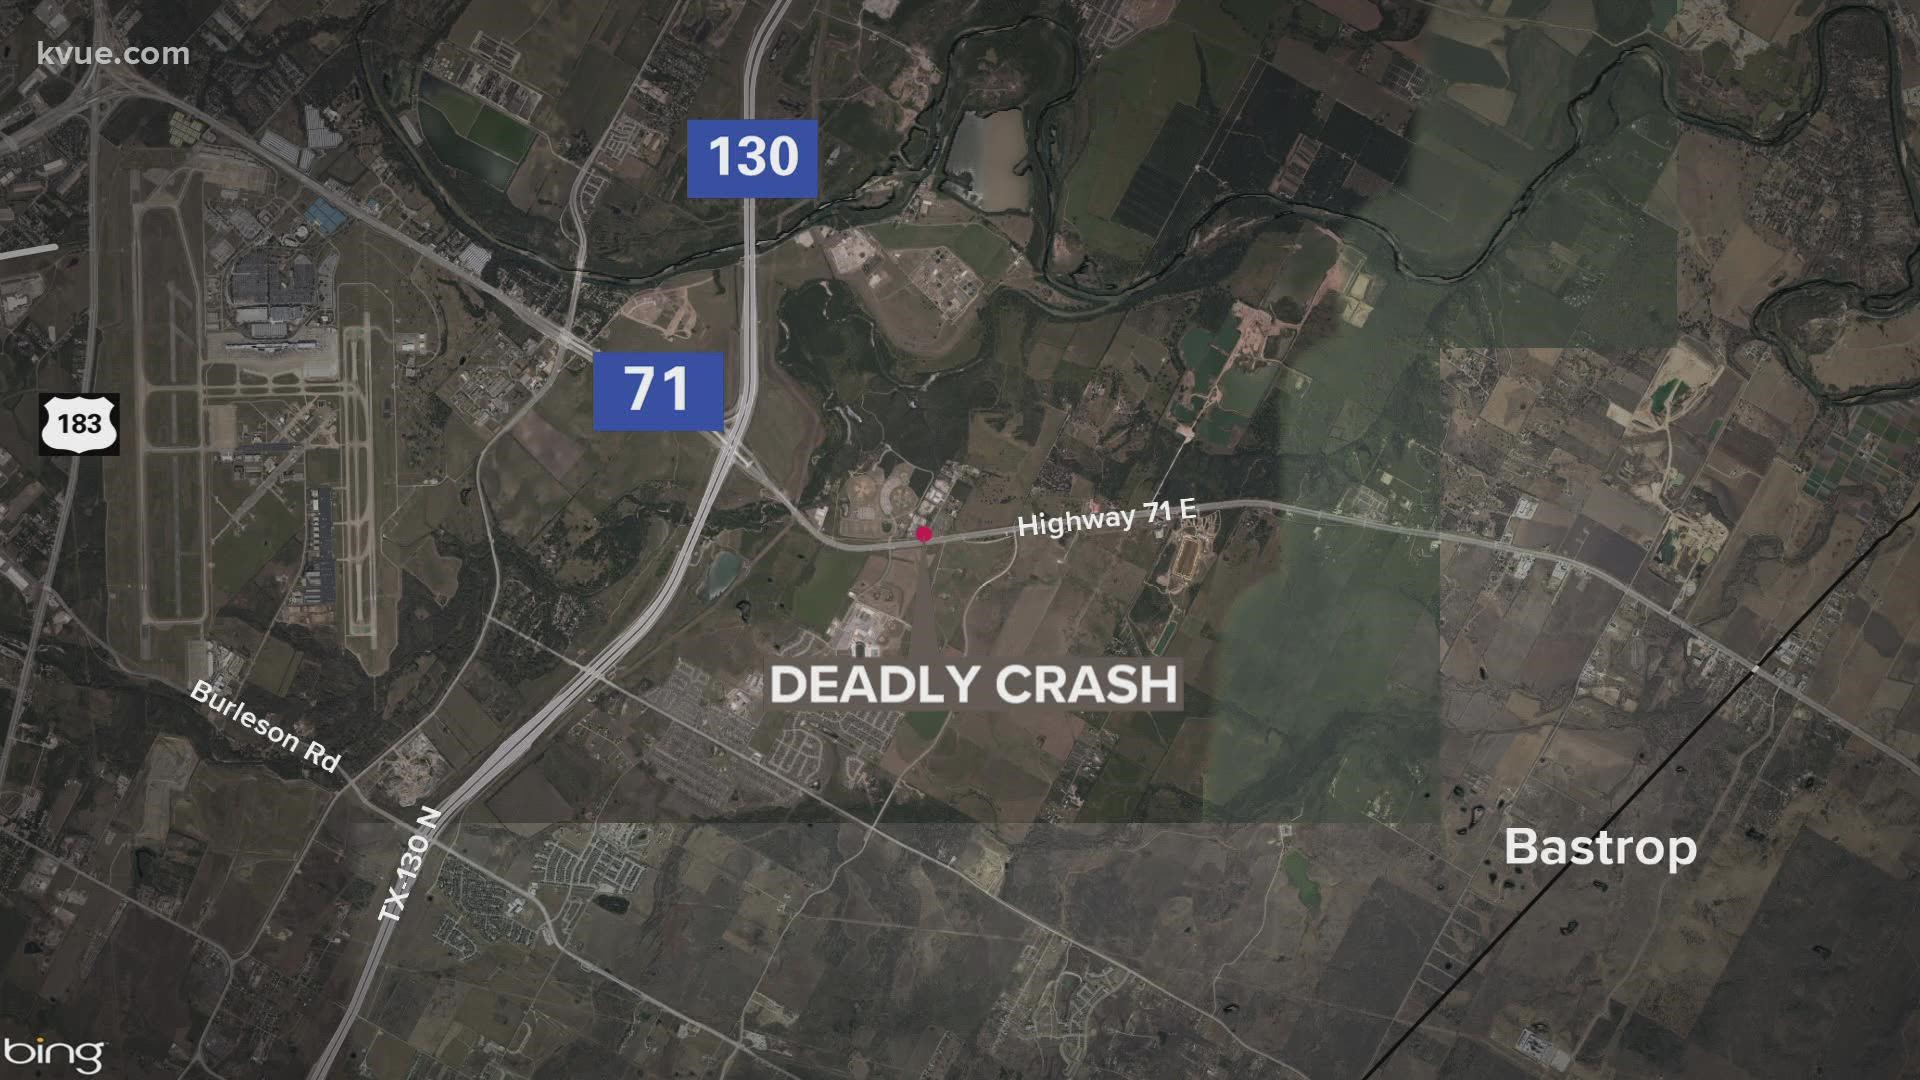 Officials are investigating a deadly crash involving a motorcycle and a semi-truck.